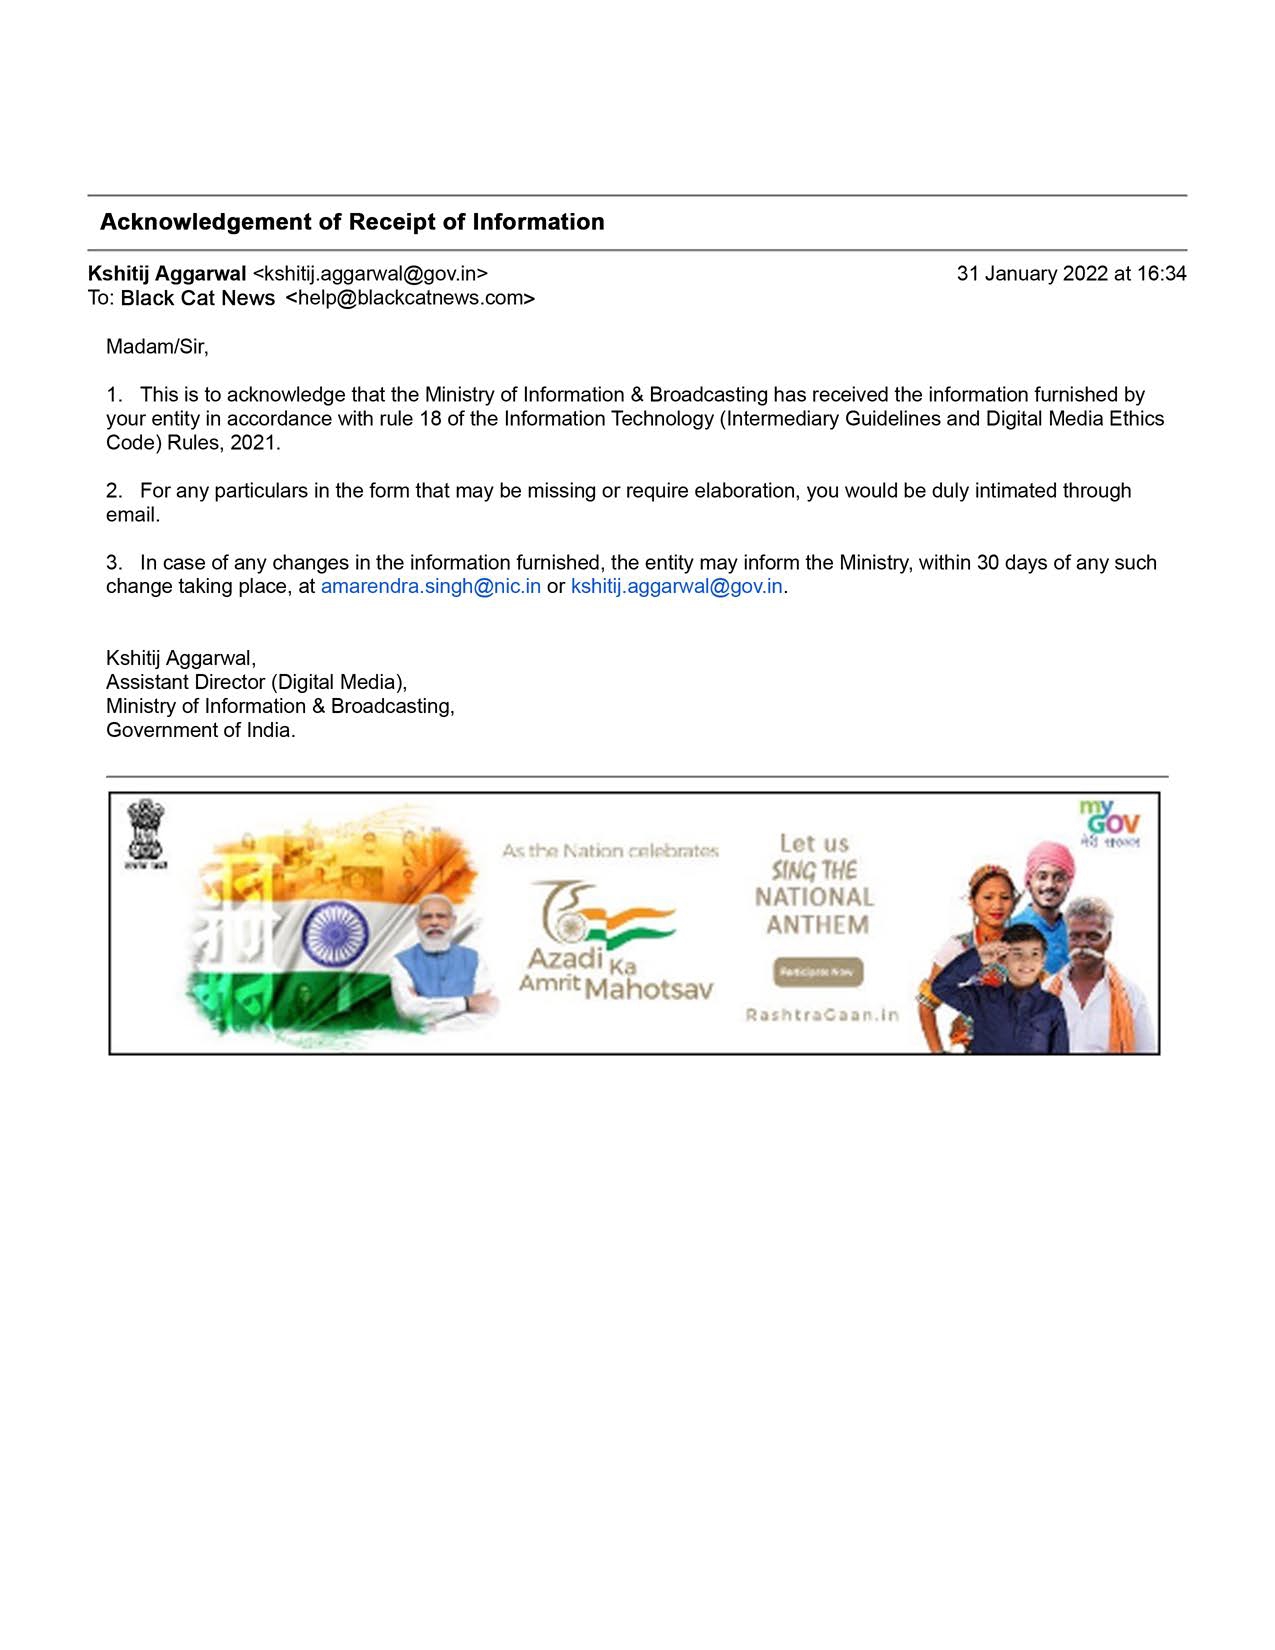 Acknowledgement of Receipt of Information, Ministry of Information & Broadcasting, Government of India.